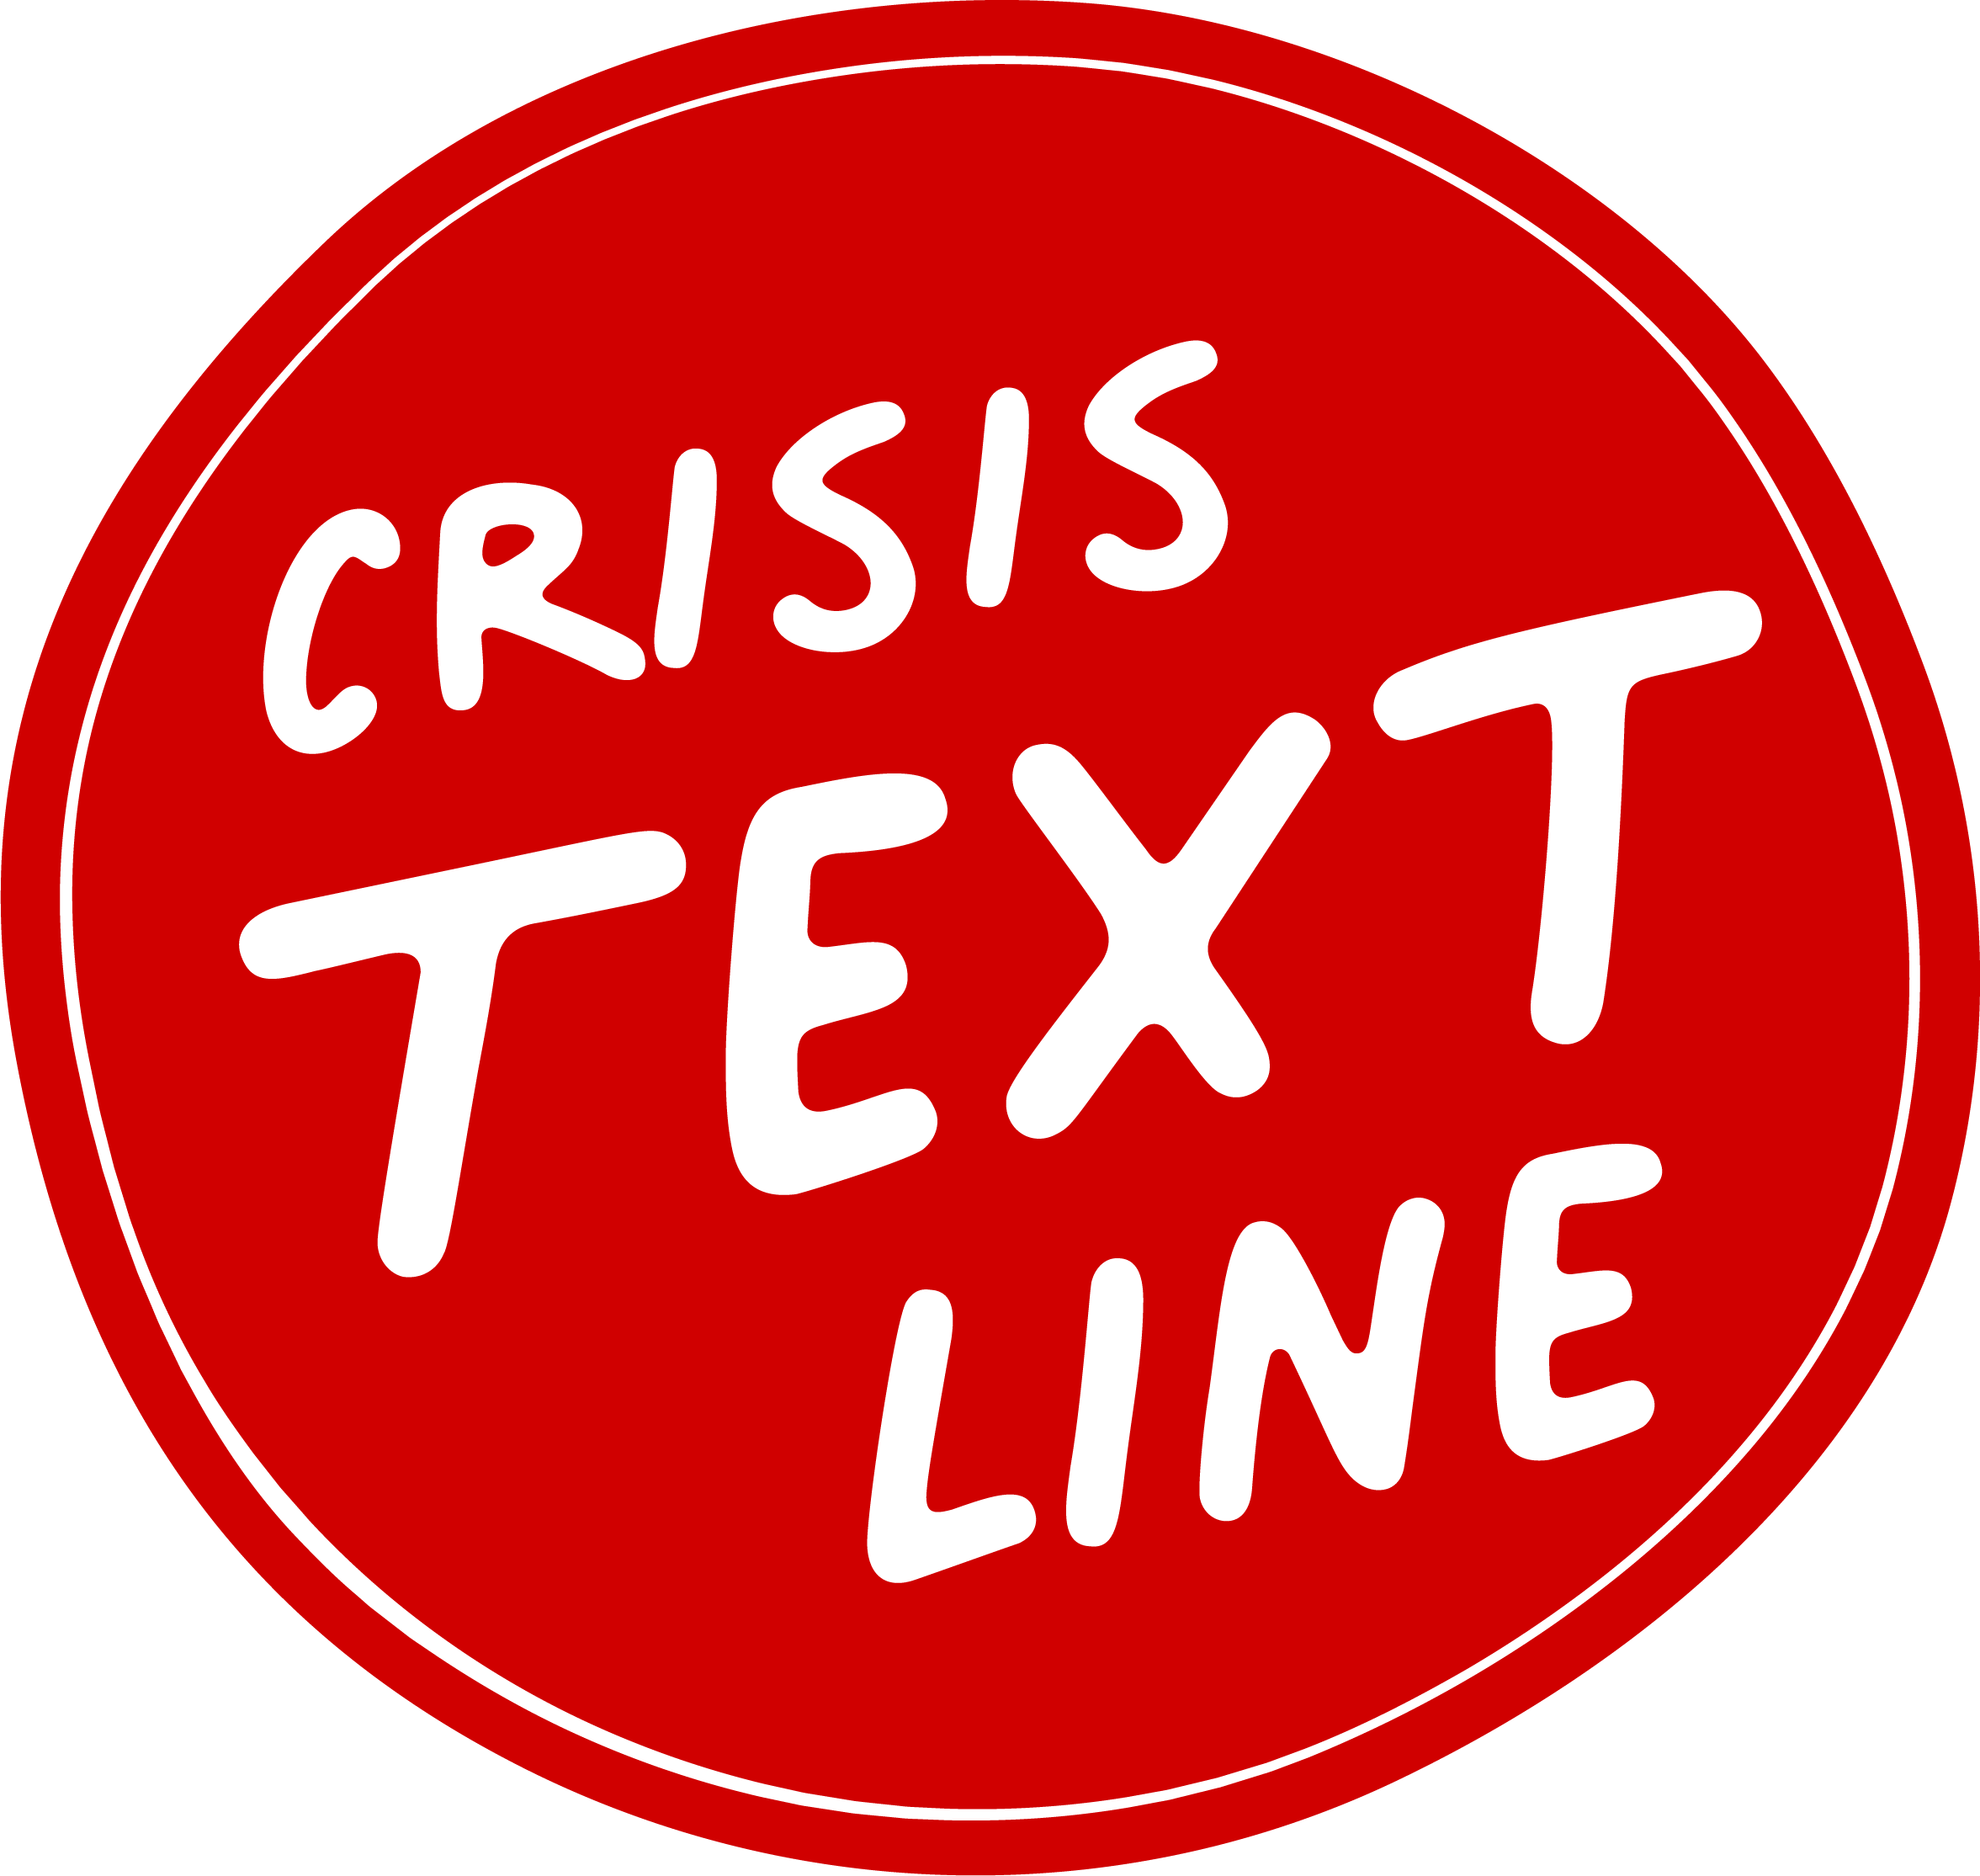 Crisis Text Line in handwritten text on red circle